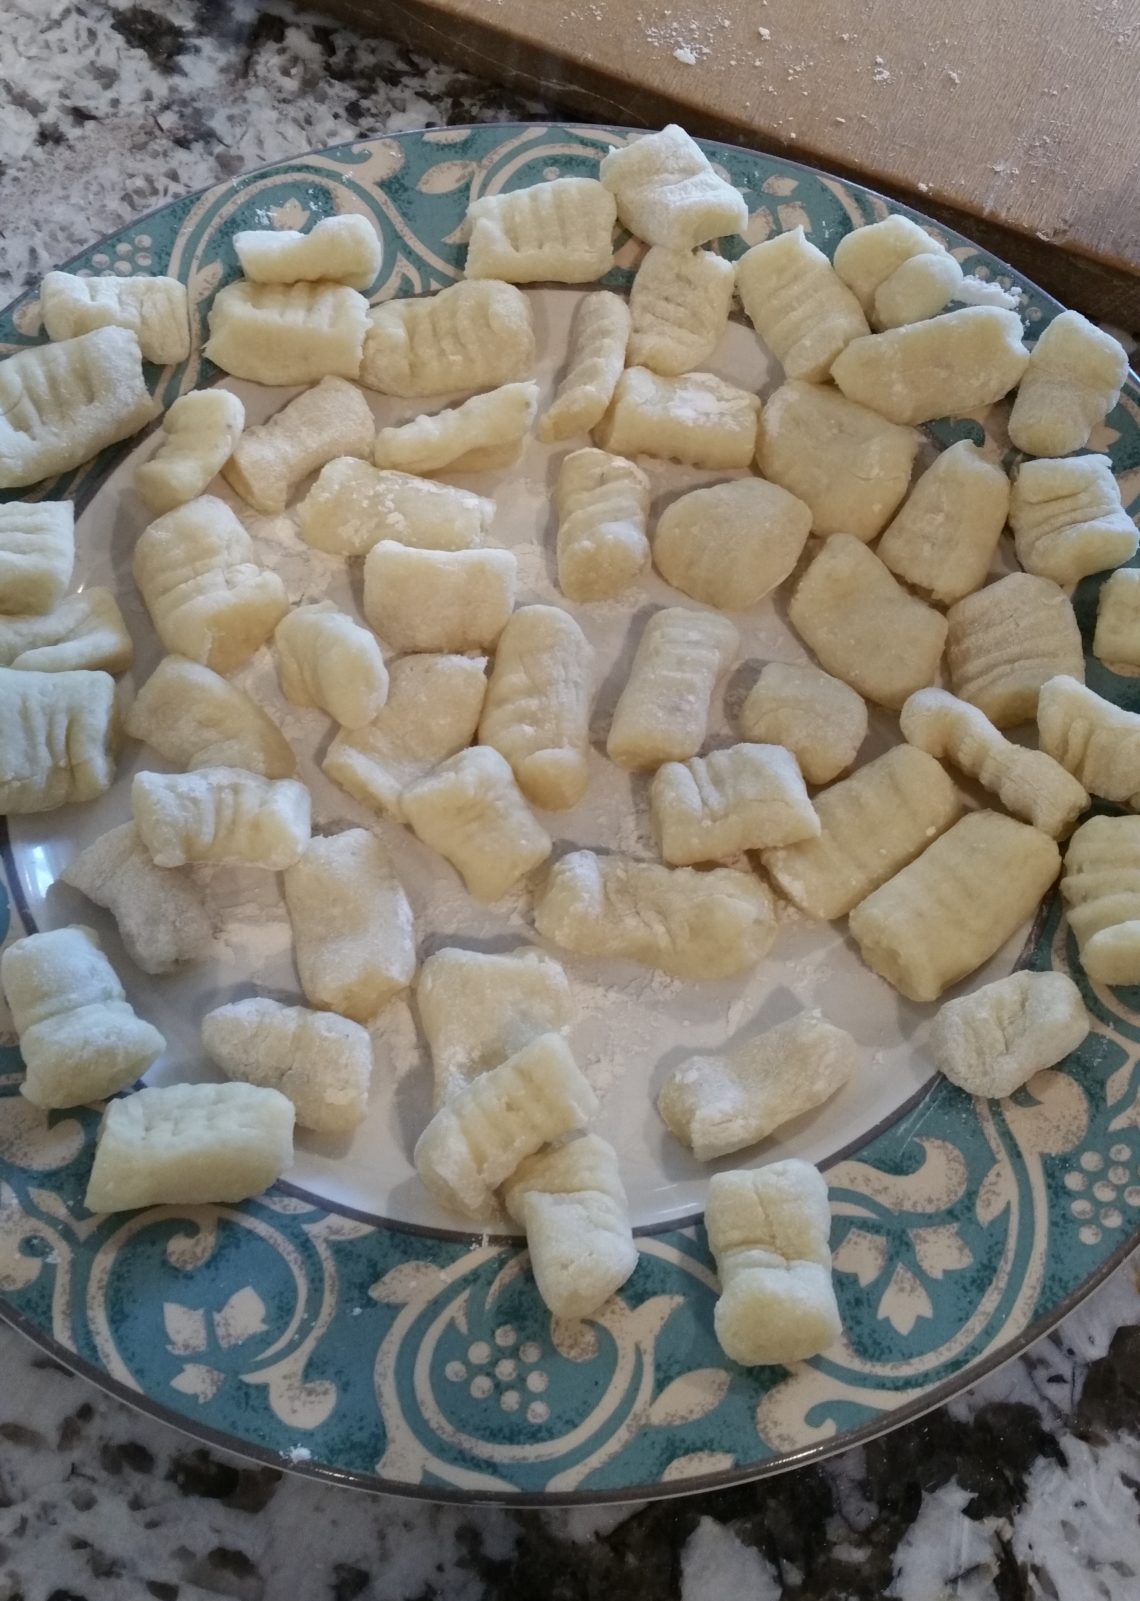 Here is some of the gnocchi before it was put on a lined tray and placed in the freezer.